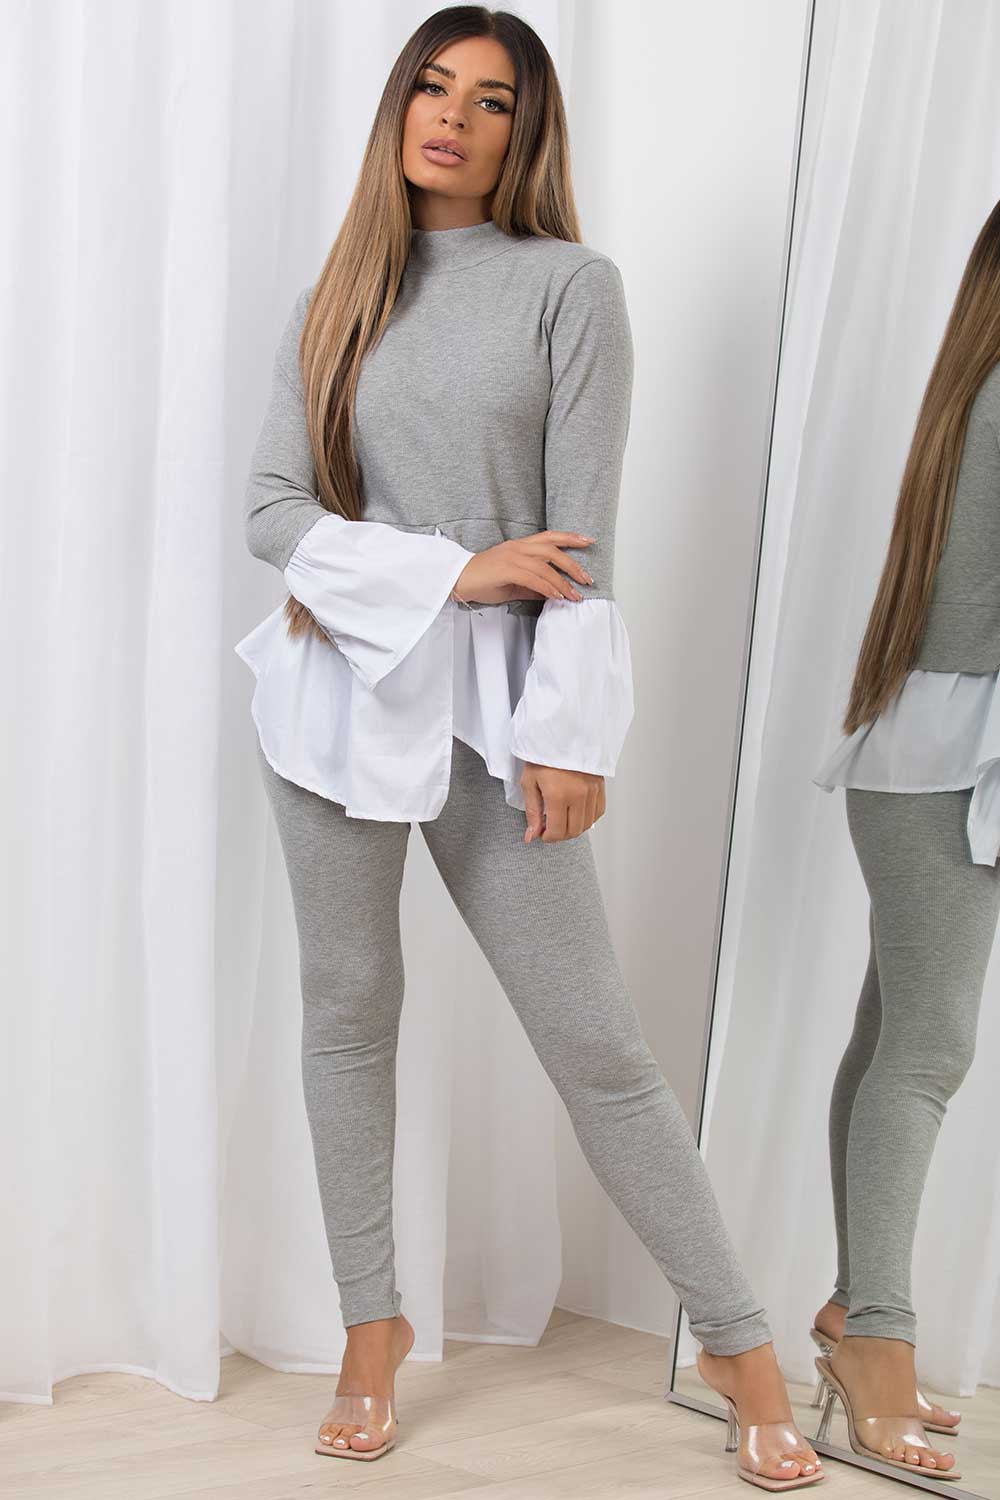 jumper shirt with frill hem and ribbed leggings two piece co ord set